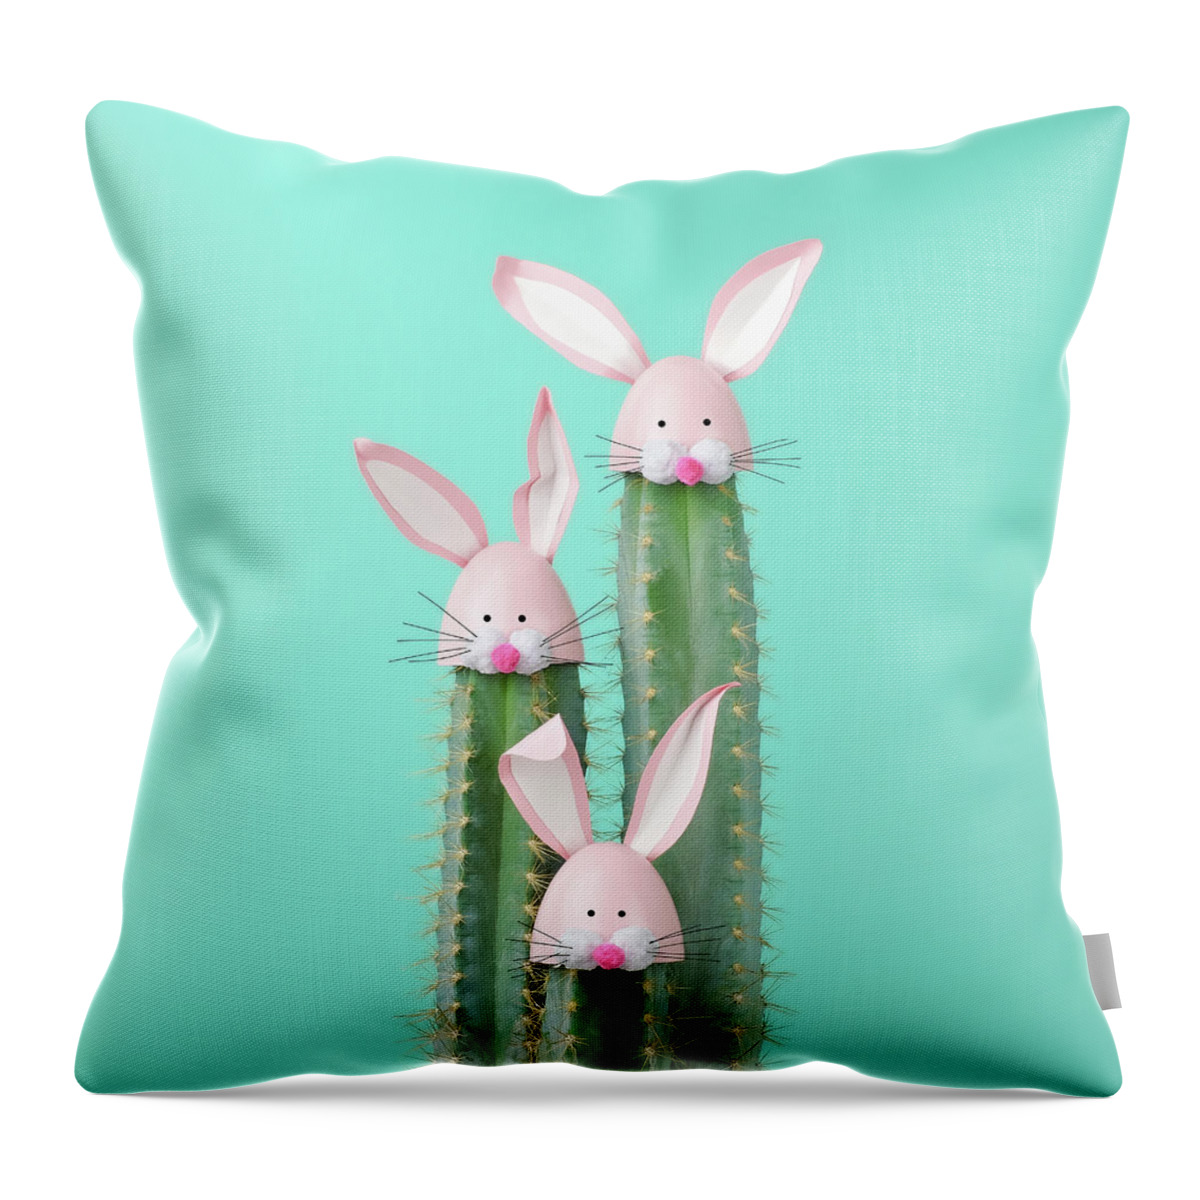 Easter Bunny Throw Pillow featuring the photograph Cactus With Easter Rabbit Decorations by Juj Winn